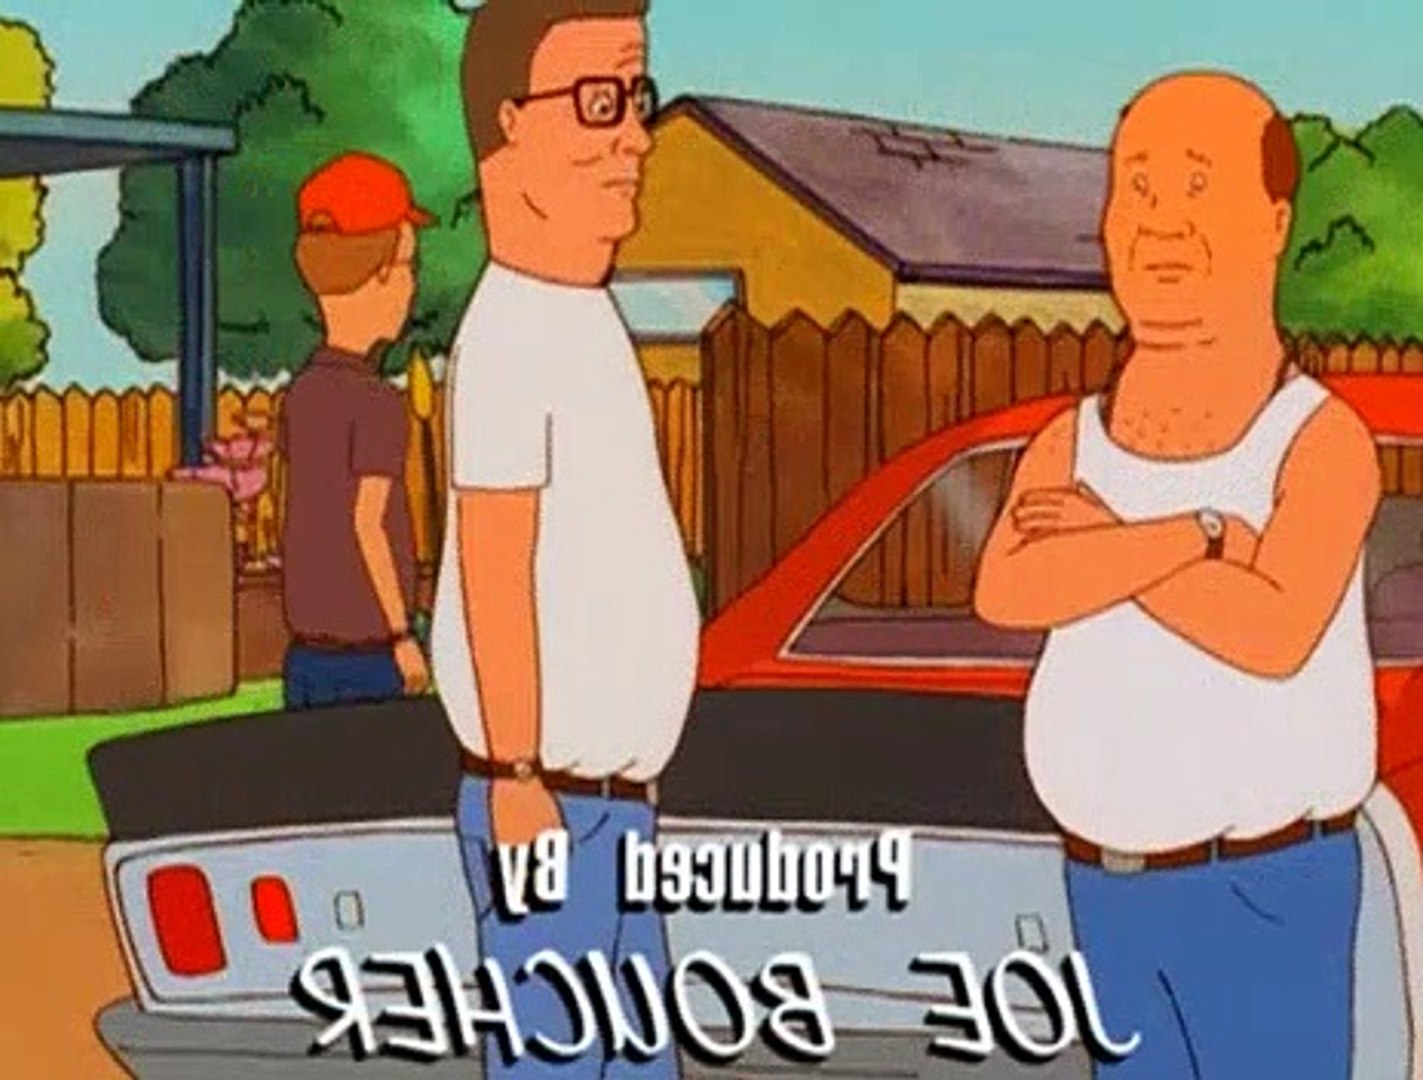 King of the Hill Season 1 by King of the Hill - Dailymotion